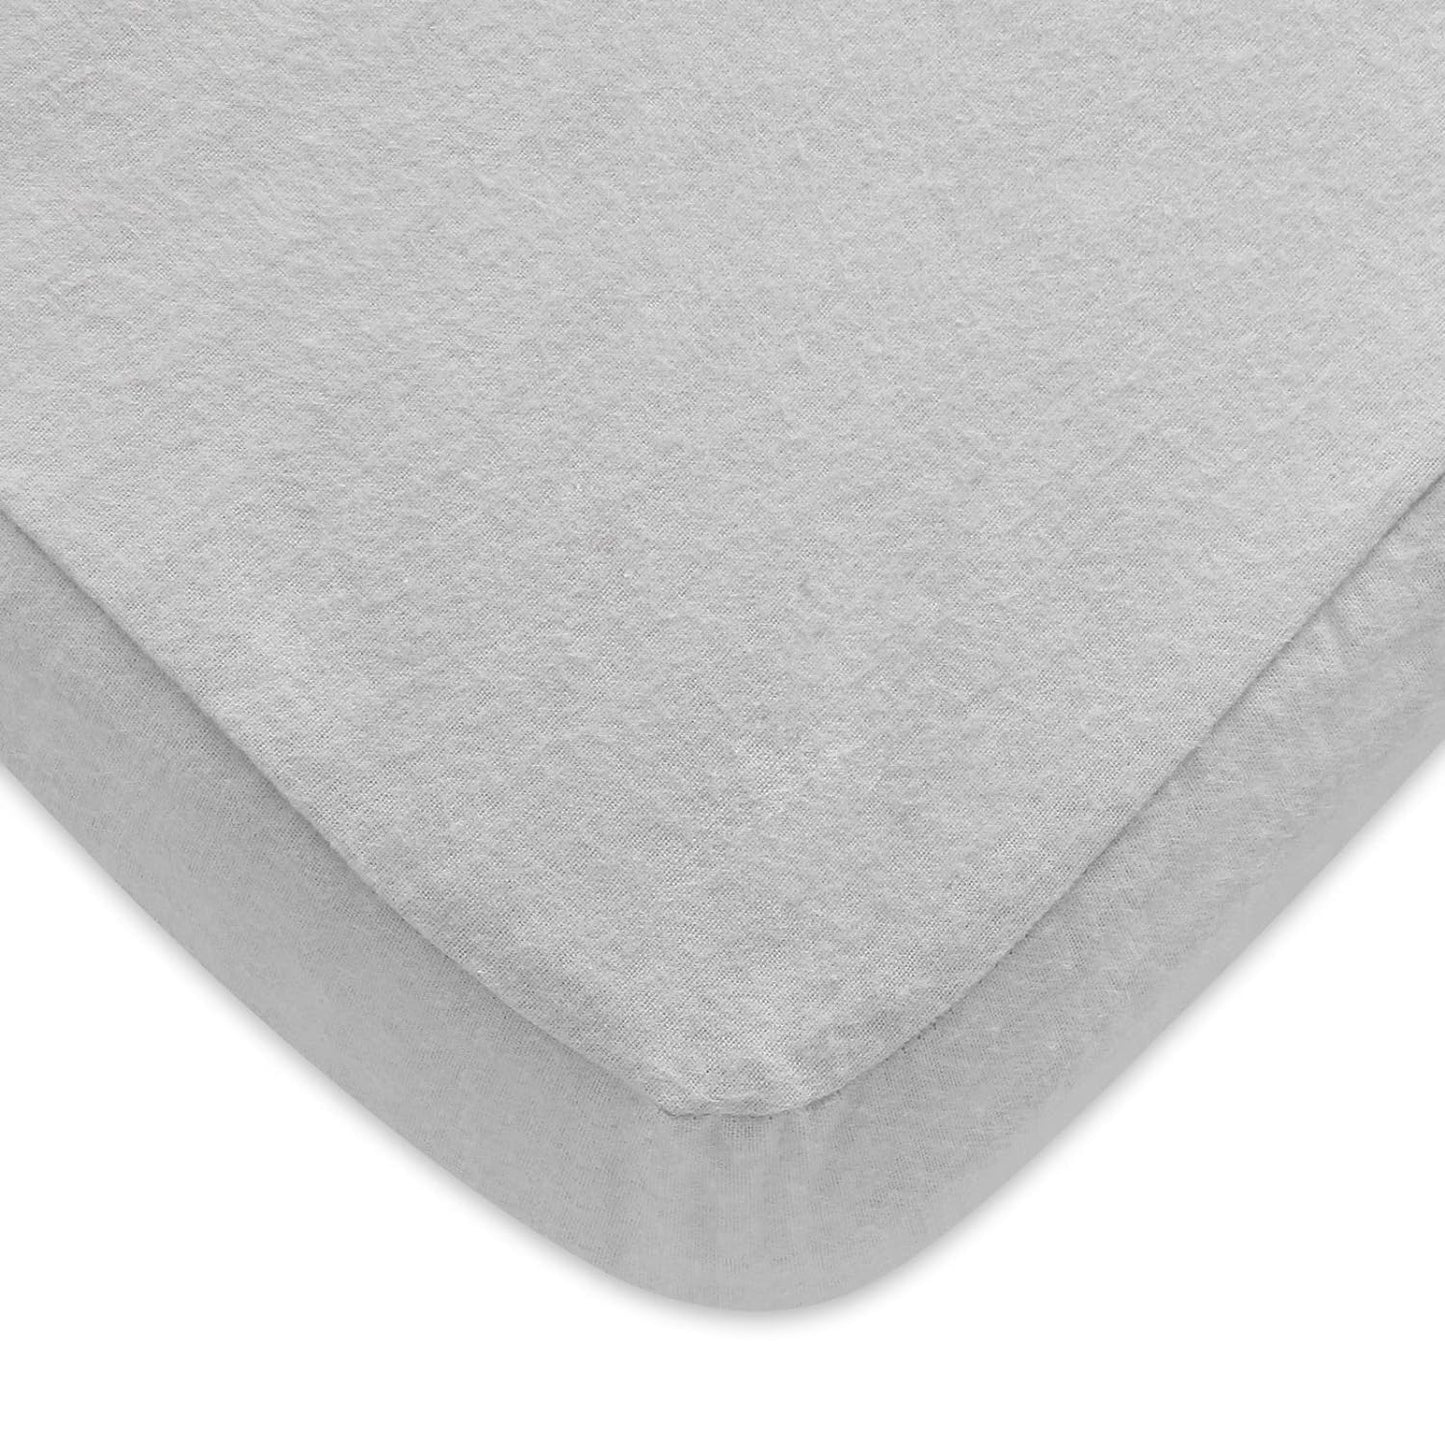 Pack n Play Sheet | Mini Crib Sheet - 100% Cotton Flannel, Fits Graco Pack and Play, Grey - Moonsea Bedding